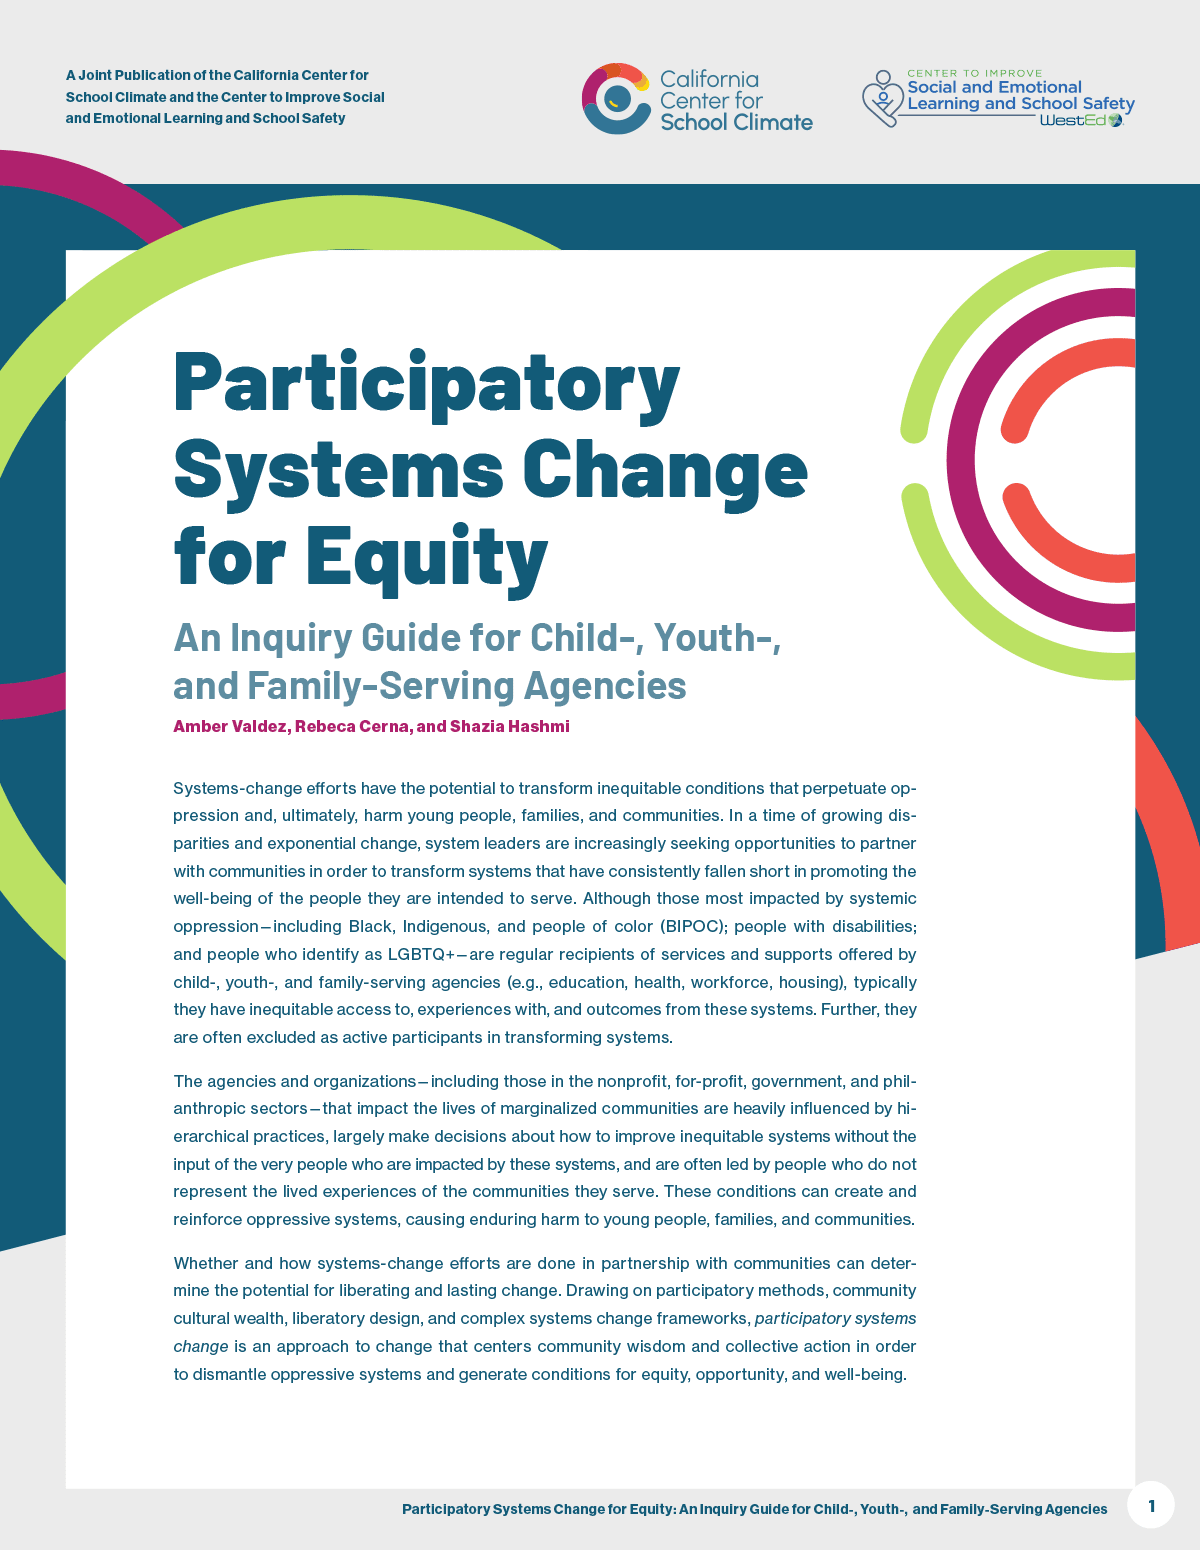 Participatory Systems Change for Equity: An Inquiry Guide for Child-, Youth-, and Family-Serving Agencies